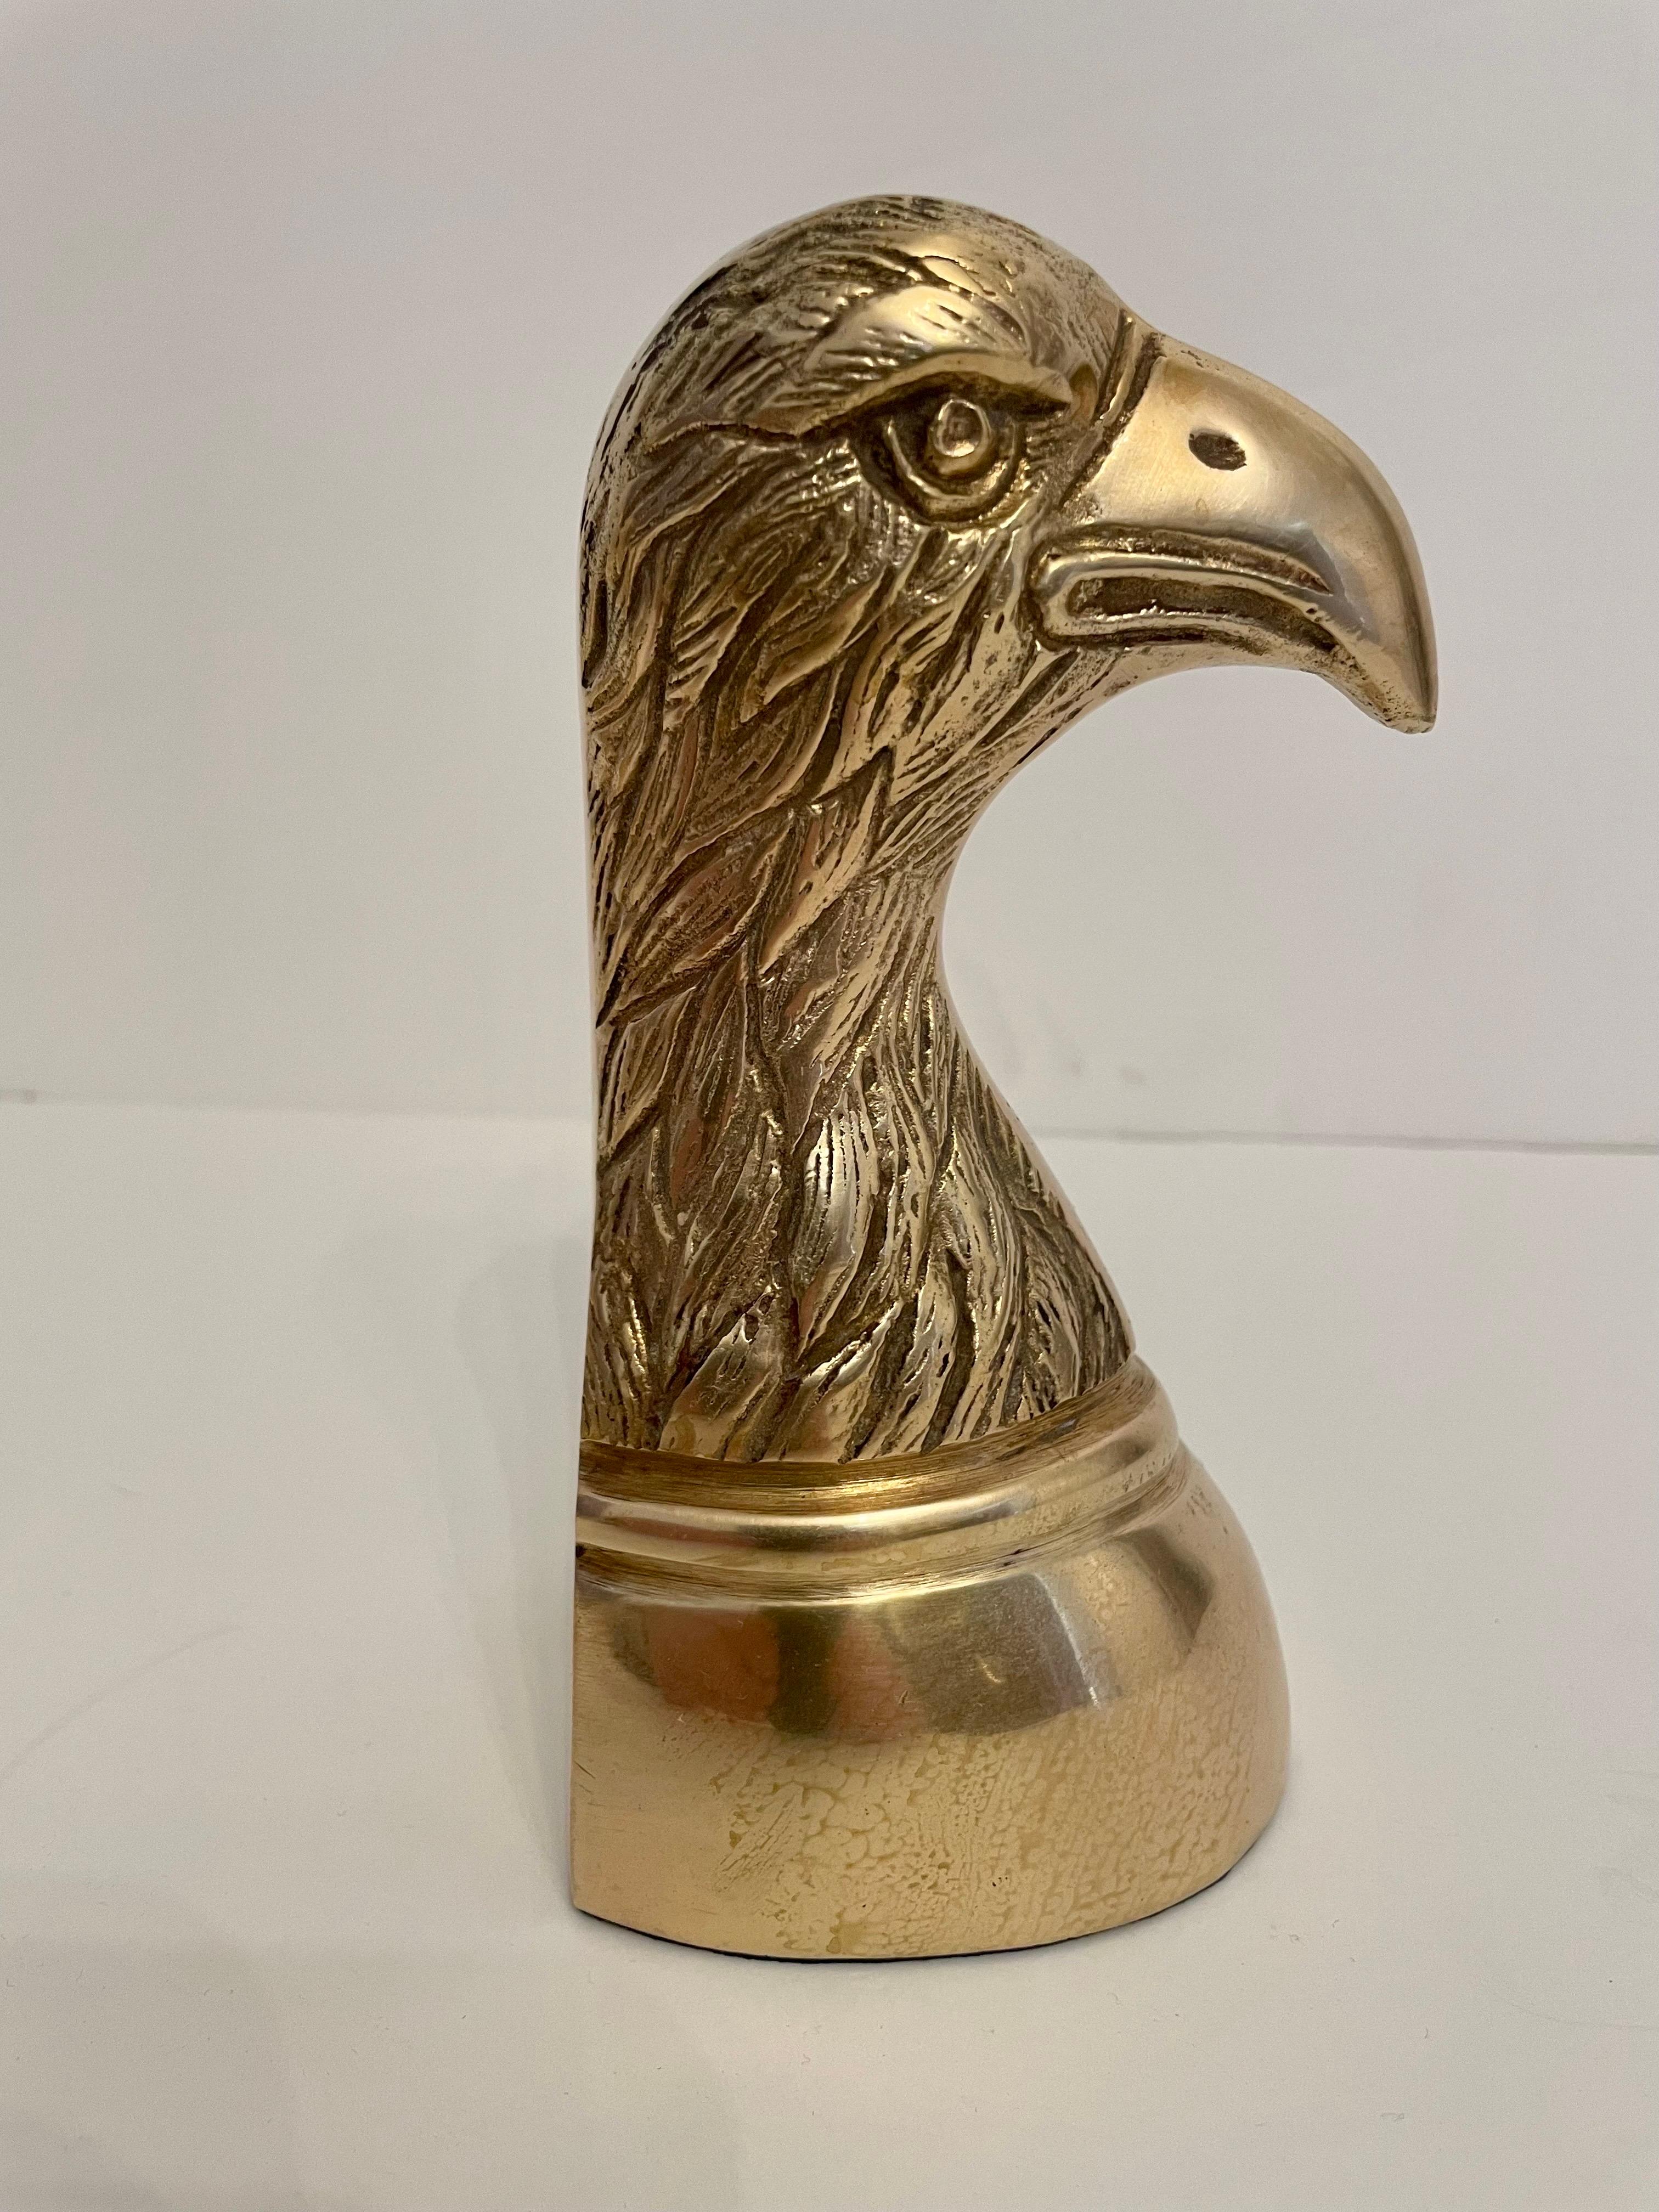 Korean Pair of Vintage Brass Eagle Bookends